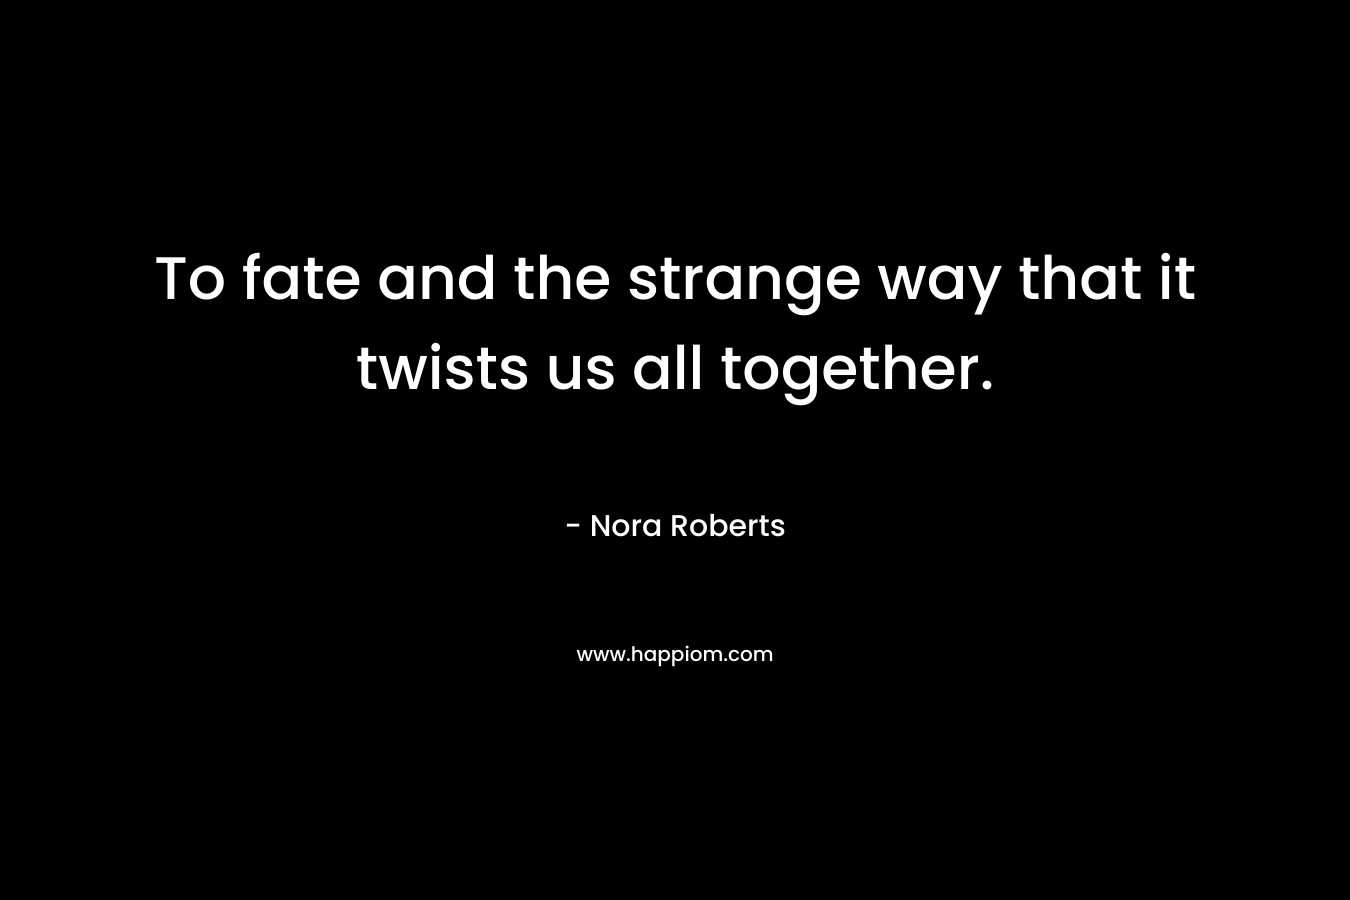 To fate and the strange way that it twists us all together. – Nora Roberts